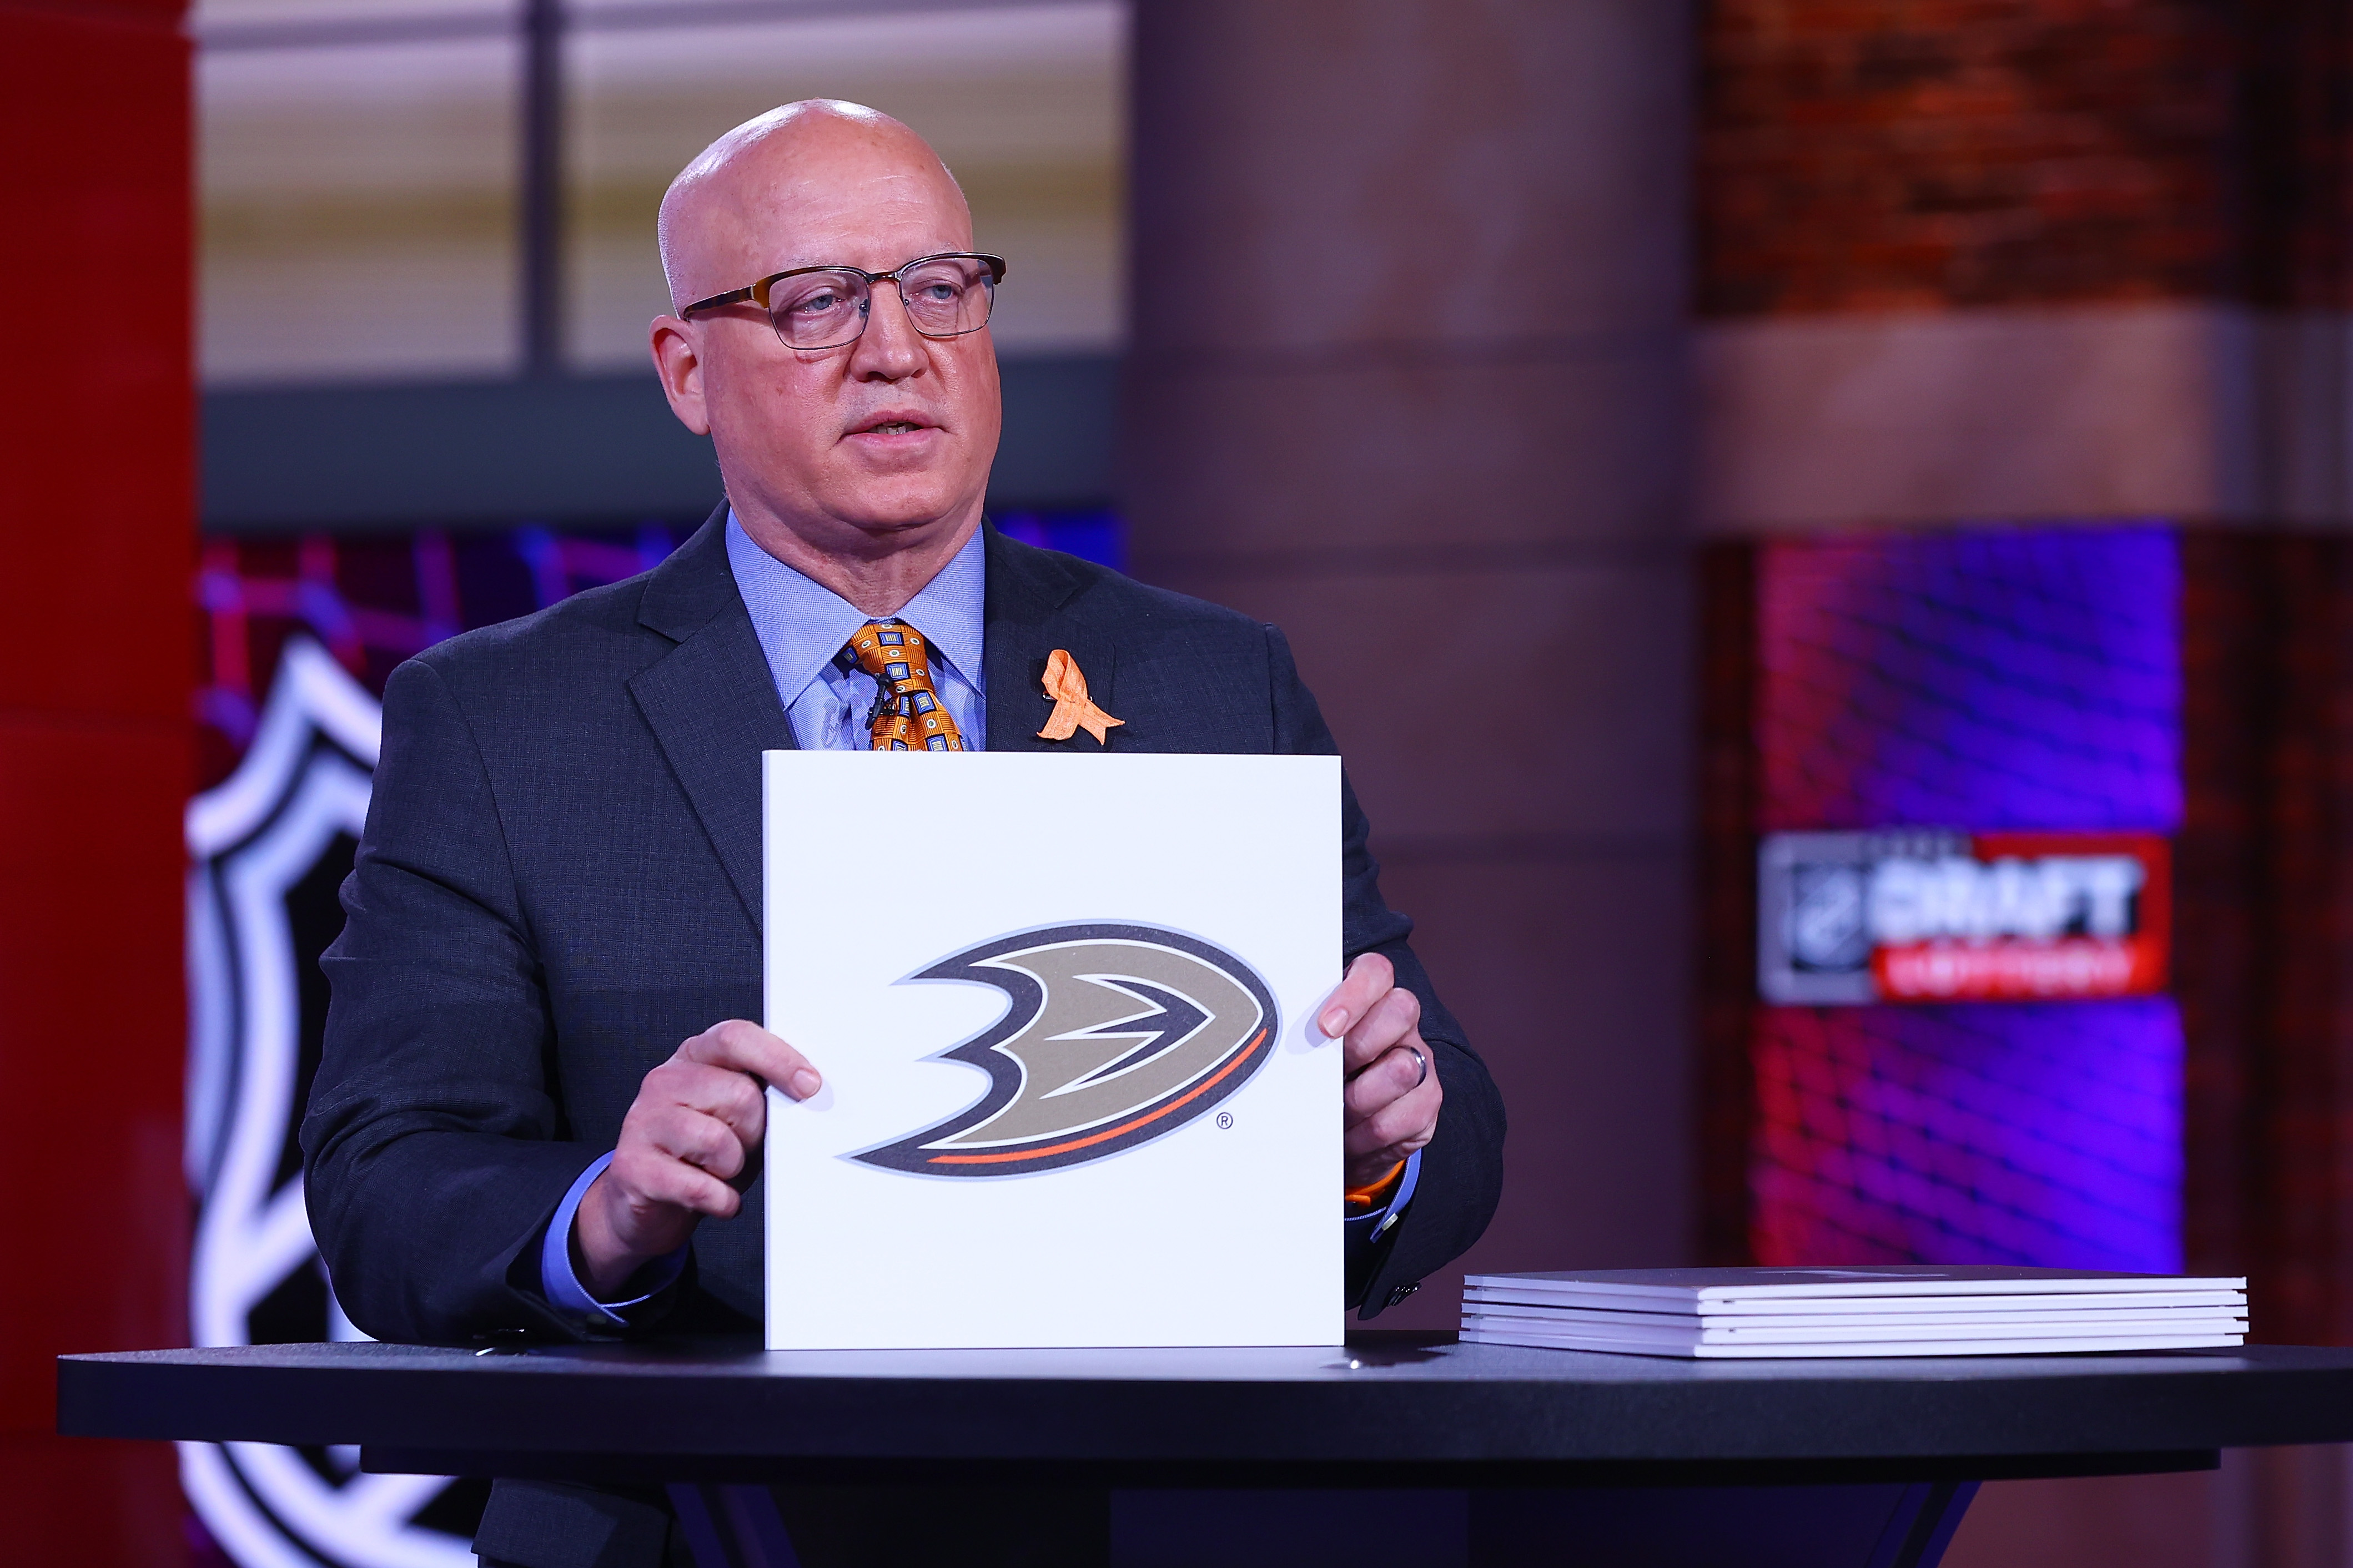 National Hockey League Deputy Commissioner Bill Daly announces the Anaheim Ducks #3 overall draft position during the 2021 NHL Draft Lottery on June 02, 2021 at the NHL Network’s studio in Secaucus, New Jersey.